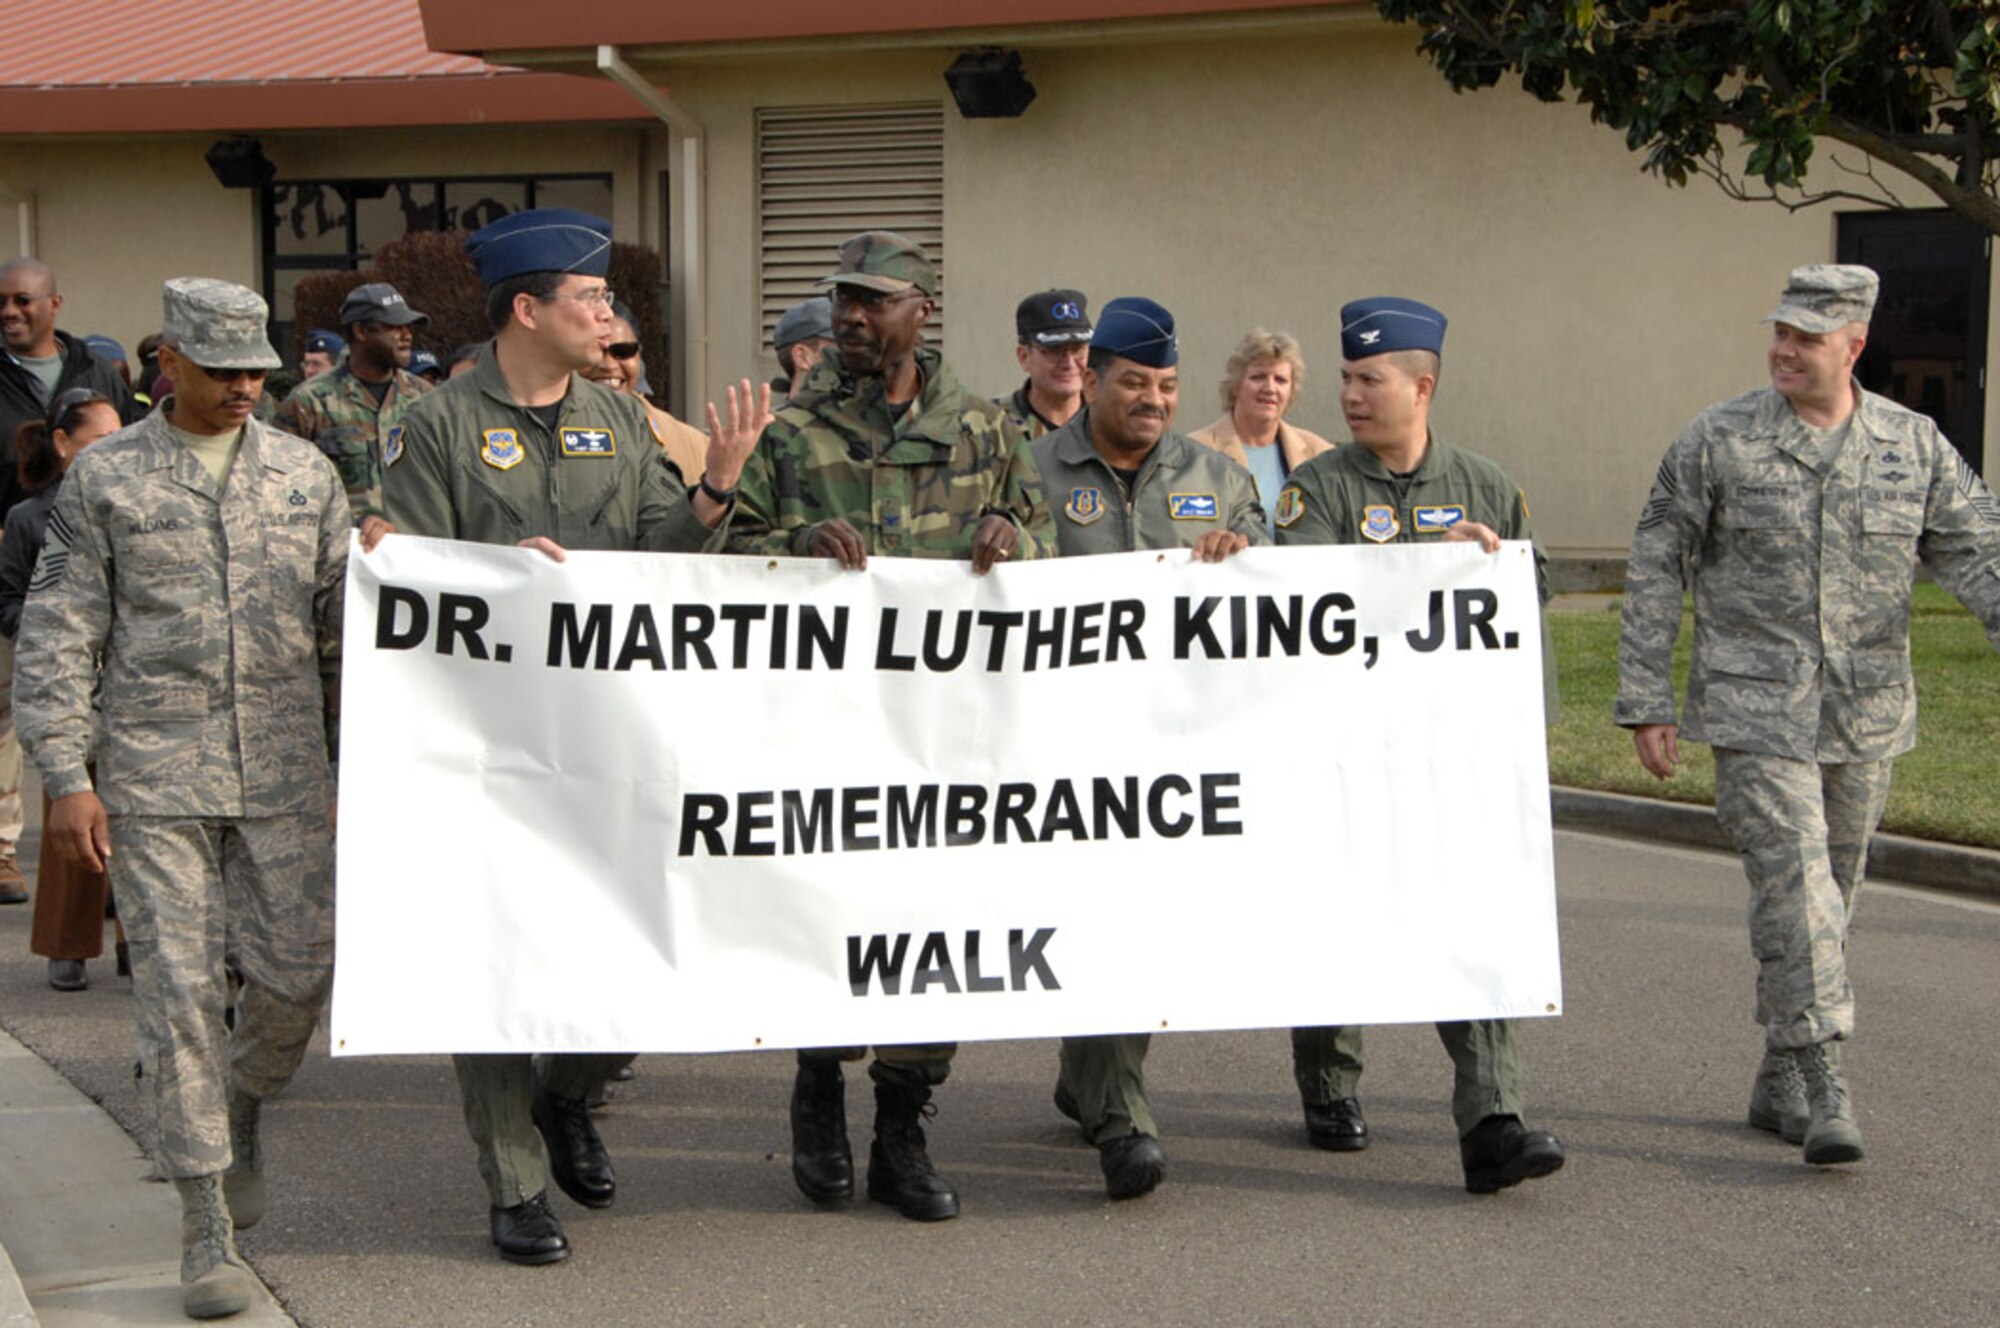 TRAVIS AIR FORCE BASE, Calif., -- Walking the walk: Members from the 349th Air Mobility Wing and the 60th AMW joined the Martin Luther King Remembrance Walk at Travis Air Force Base, Jan. 14, to celebrate the many great accomplishments of the slain civil rights leader. About 50 people turned out for the walk, leaving from 60th AMW headquarters building and walking for about 20 minutes to Chapel 1, for a ceremony there. Holding the banner from (left to right) are: 60th AMW Command Chief Master Sgt. Michael Williams; 615th Contingency Response Wing Commander, Col. Tony Hinen; 60th AMW Chaplain (Col.) Leon Page; 349th Operations Group Deputy Commander, Col. Dale Andrews, and 60th AMW Vice Commander, Col. GI Tuck. 
“I am motivated by the idea that you can have one individual like Martin Luther King inspire so many people,” said Master Sgt. Drancy Ennis, Unit Training Education Manager, 60th Maintenance Operations Squadron, who helped organize the walk. (U.S. Air Force photo by Master Sgt. Wendy Weidenhamer)